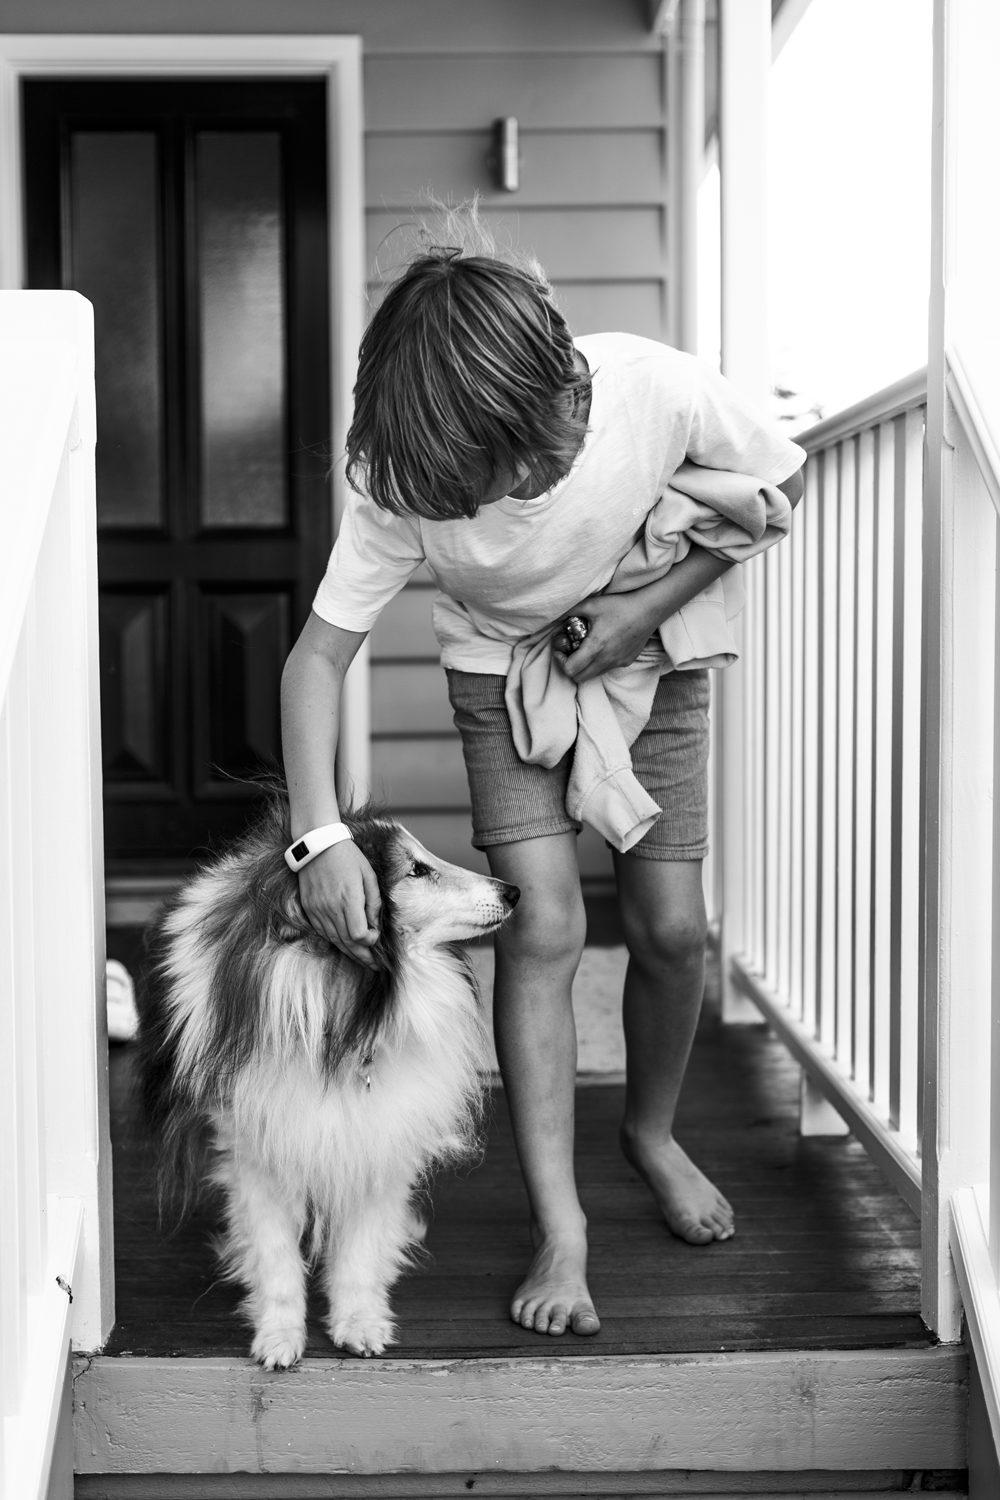 Black and white photograph of a portrait of a young boy with a dog on a domestic veranda.